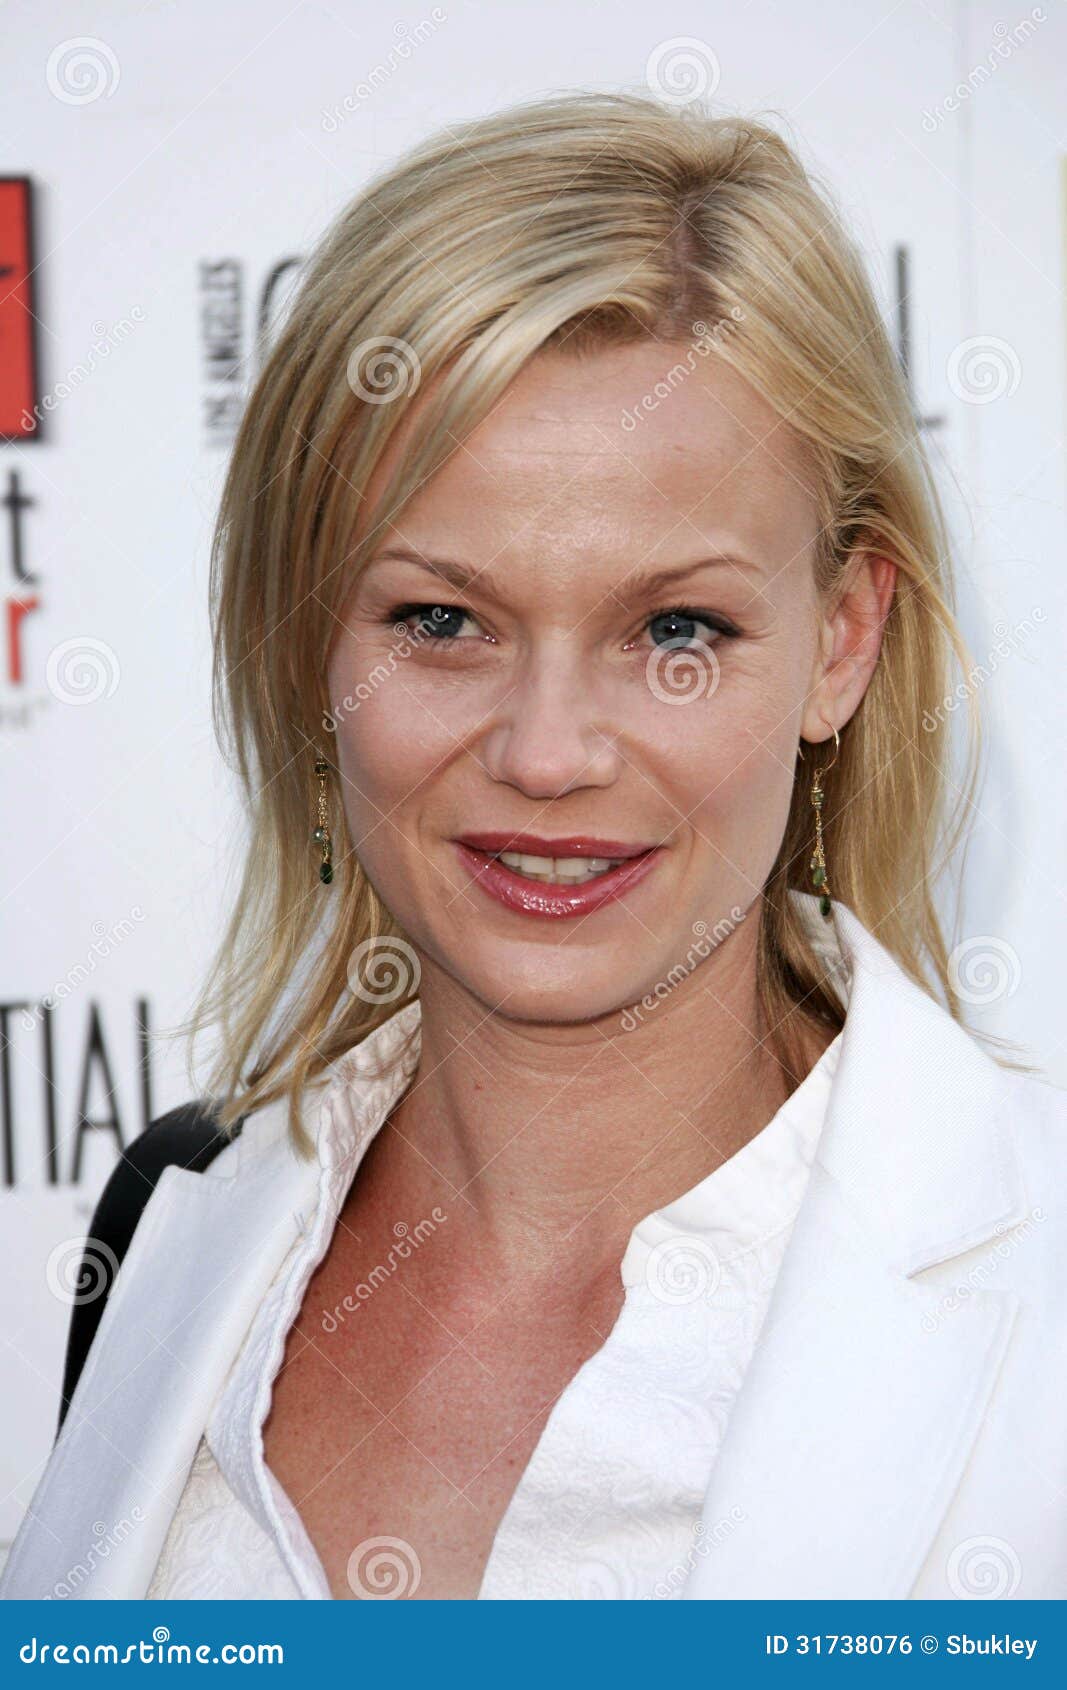 Pictures of samantha mathis